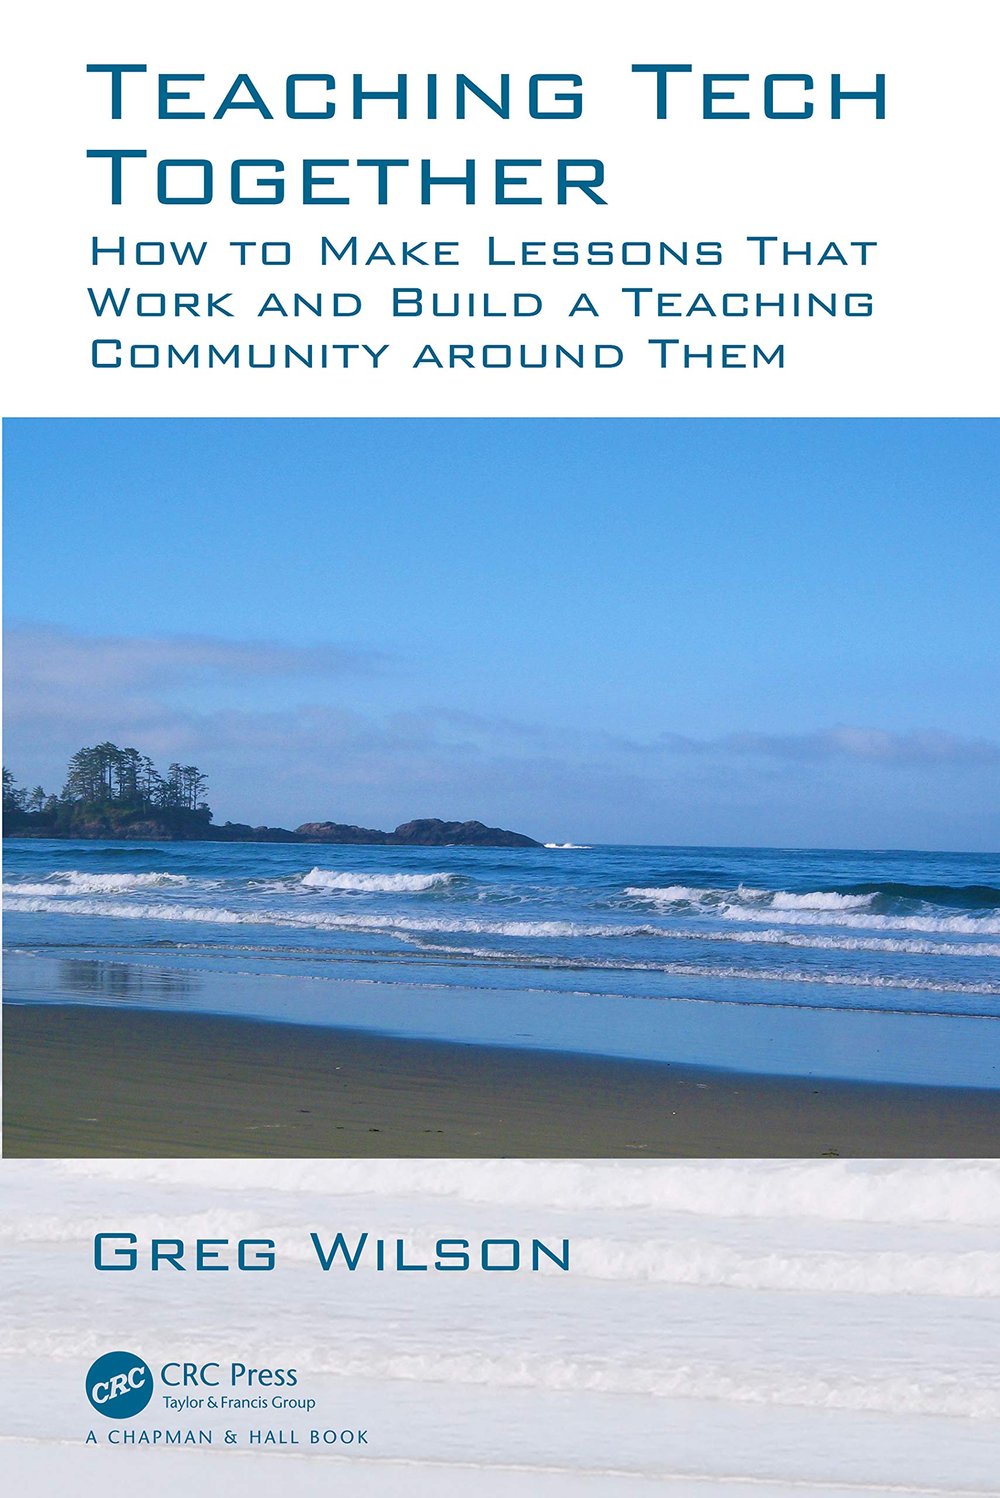 Teaching Tech Together by Greg Wilson